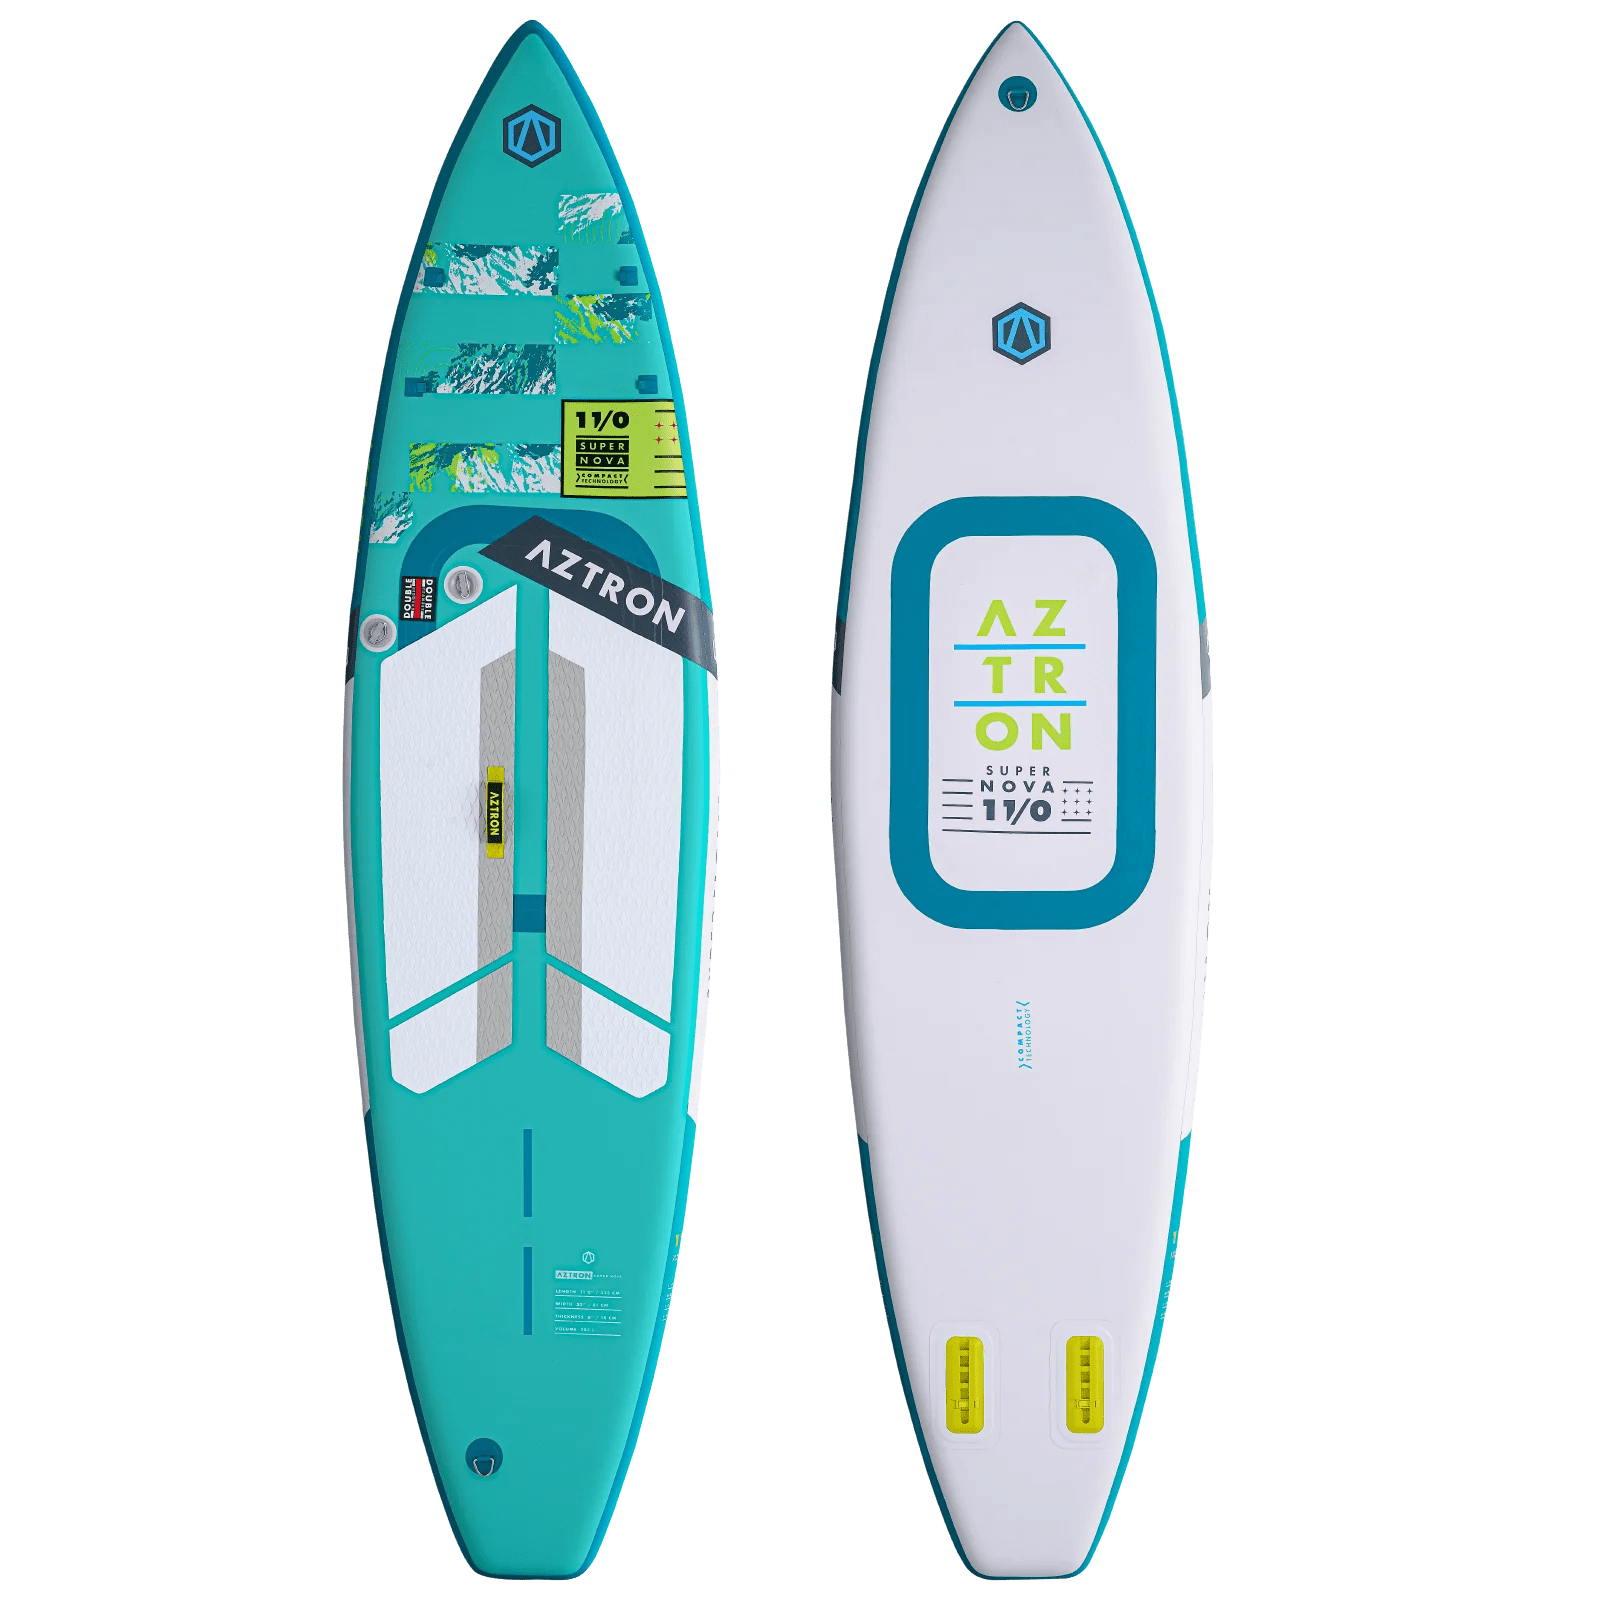 Aztron Super Nova Compact 11'0" 2023 - Worthing Watersports - SUP Inflatables - Aztron